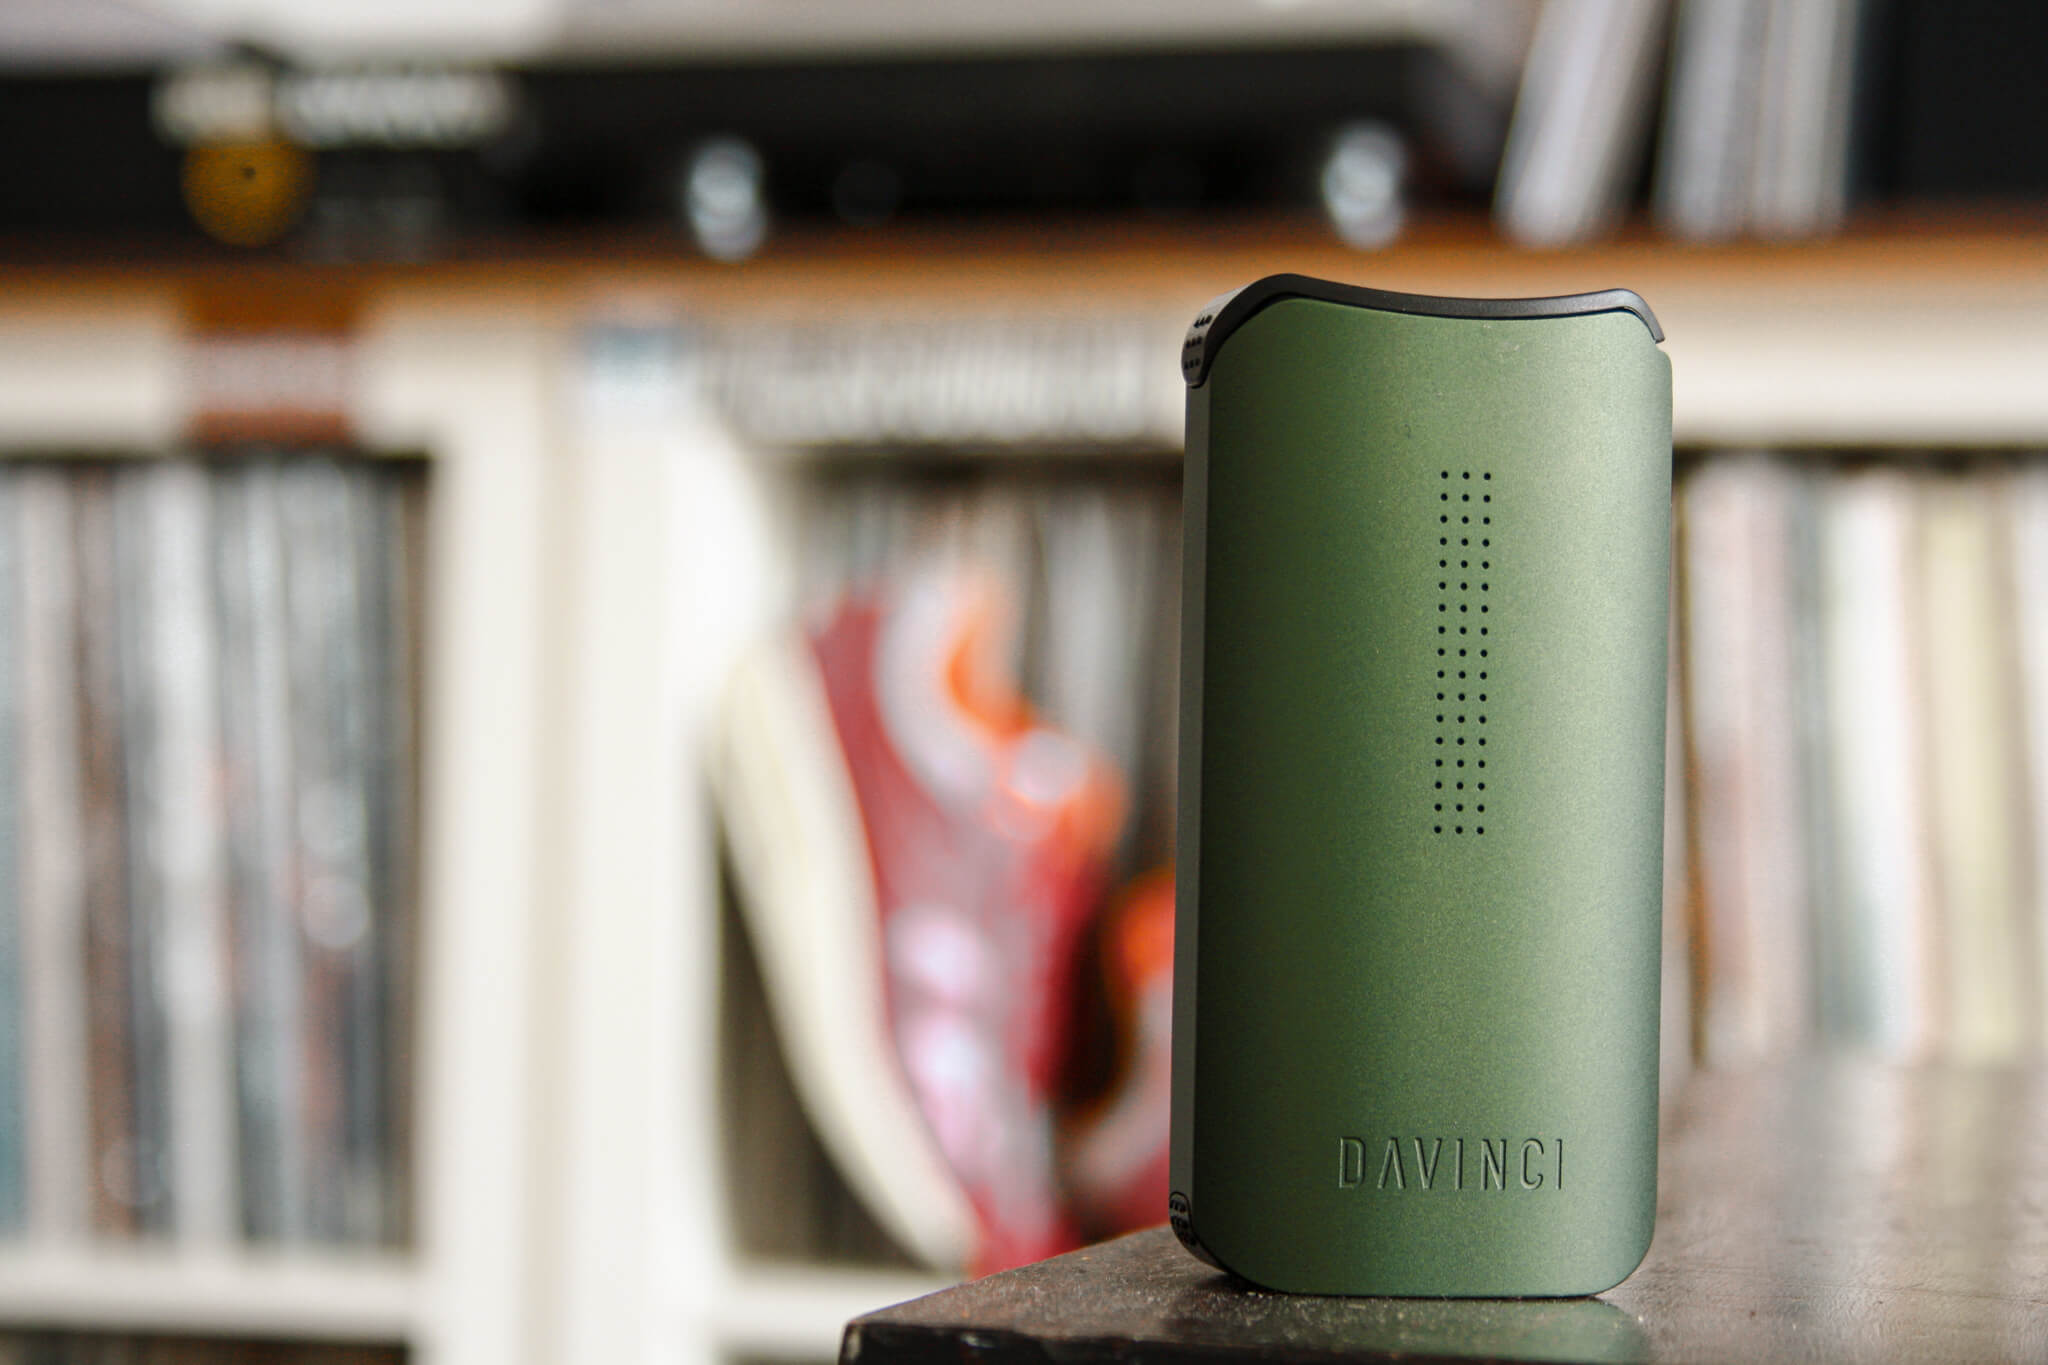 DaVinci IQC Review: What's new in this improved version of the IQ?